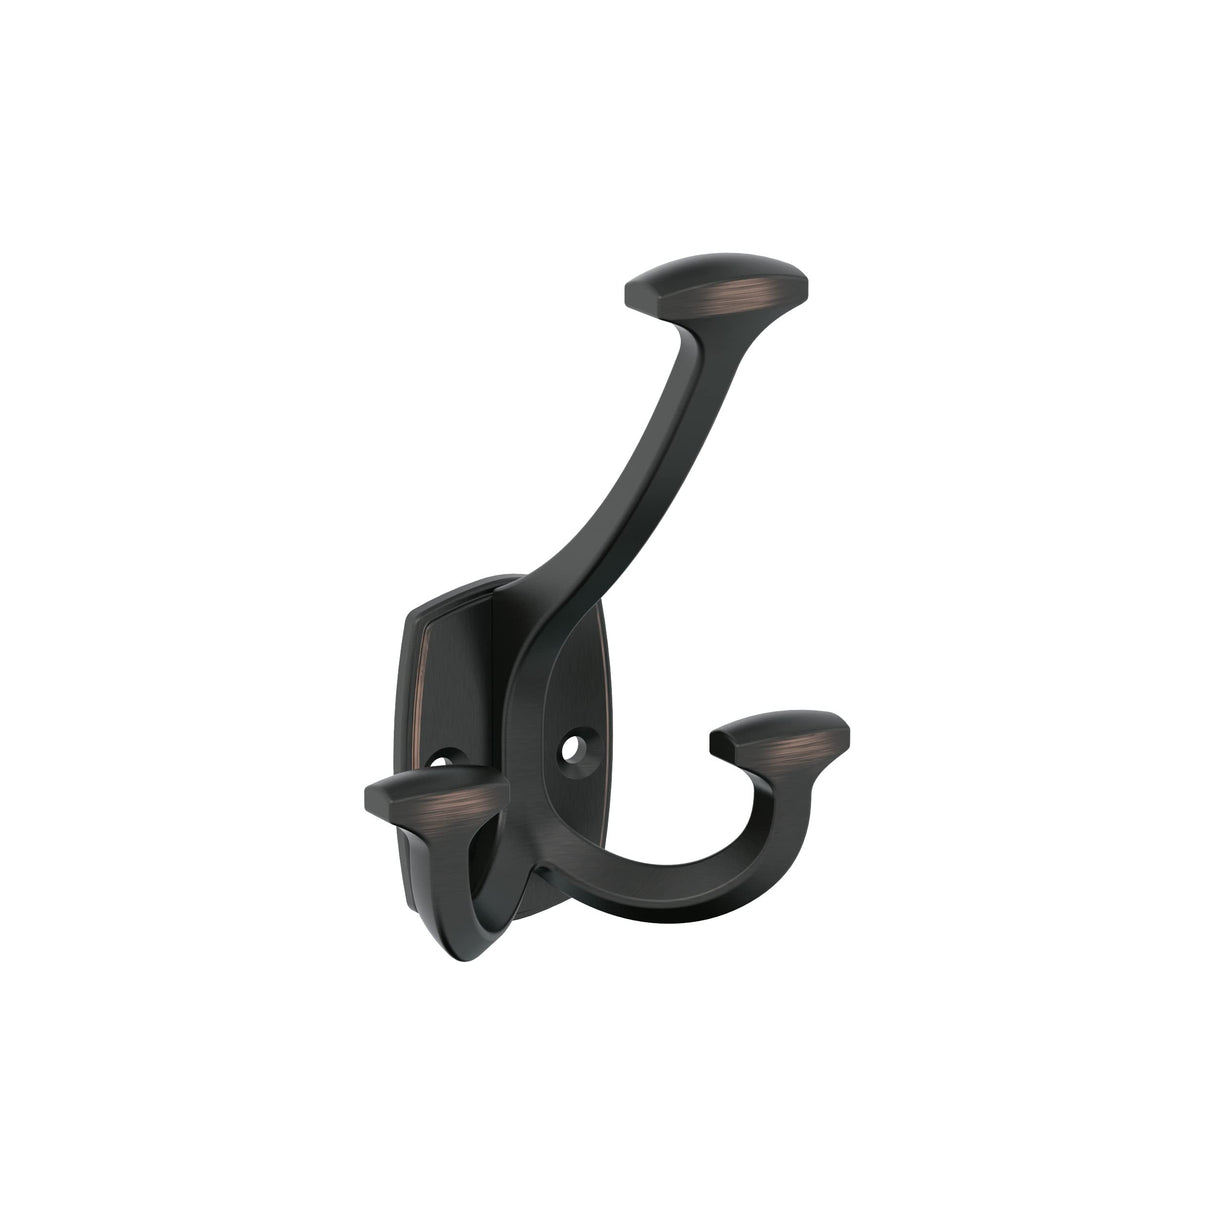 Amerock H37004ORB Vicinity Triple Prong Decorative Wall Hook Oil Rubbed Bronze Hook for Coats, Hats, Backpacks, Bags Hooks for Bathroom, Bedroom, Closet, Entryway, Laundry Room, Office